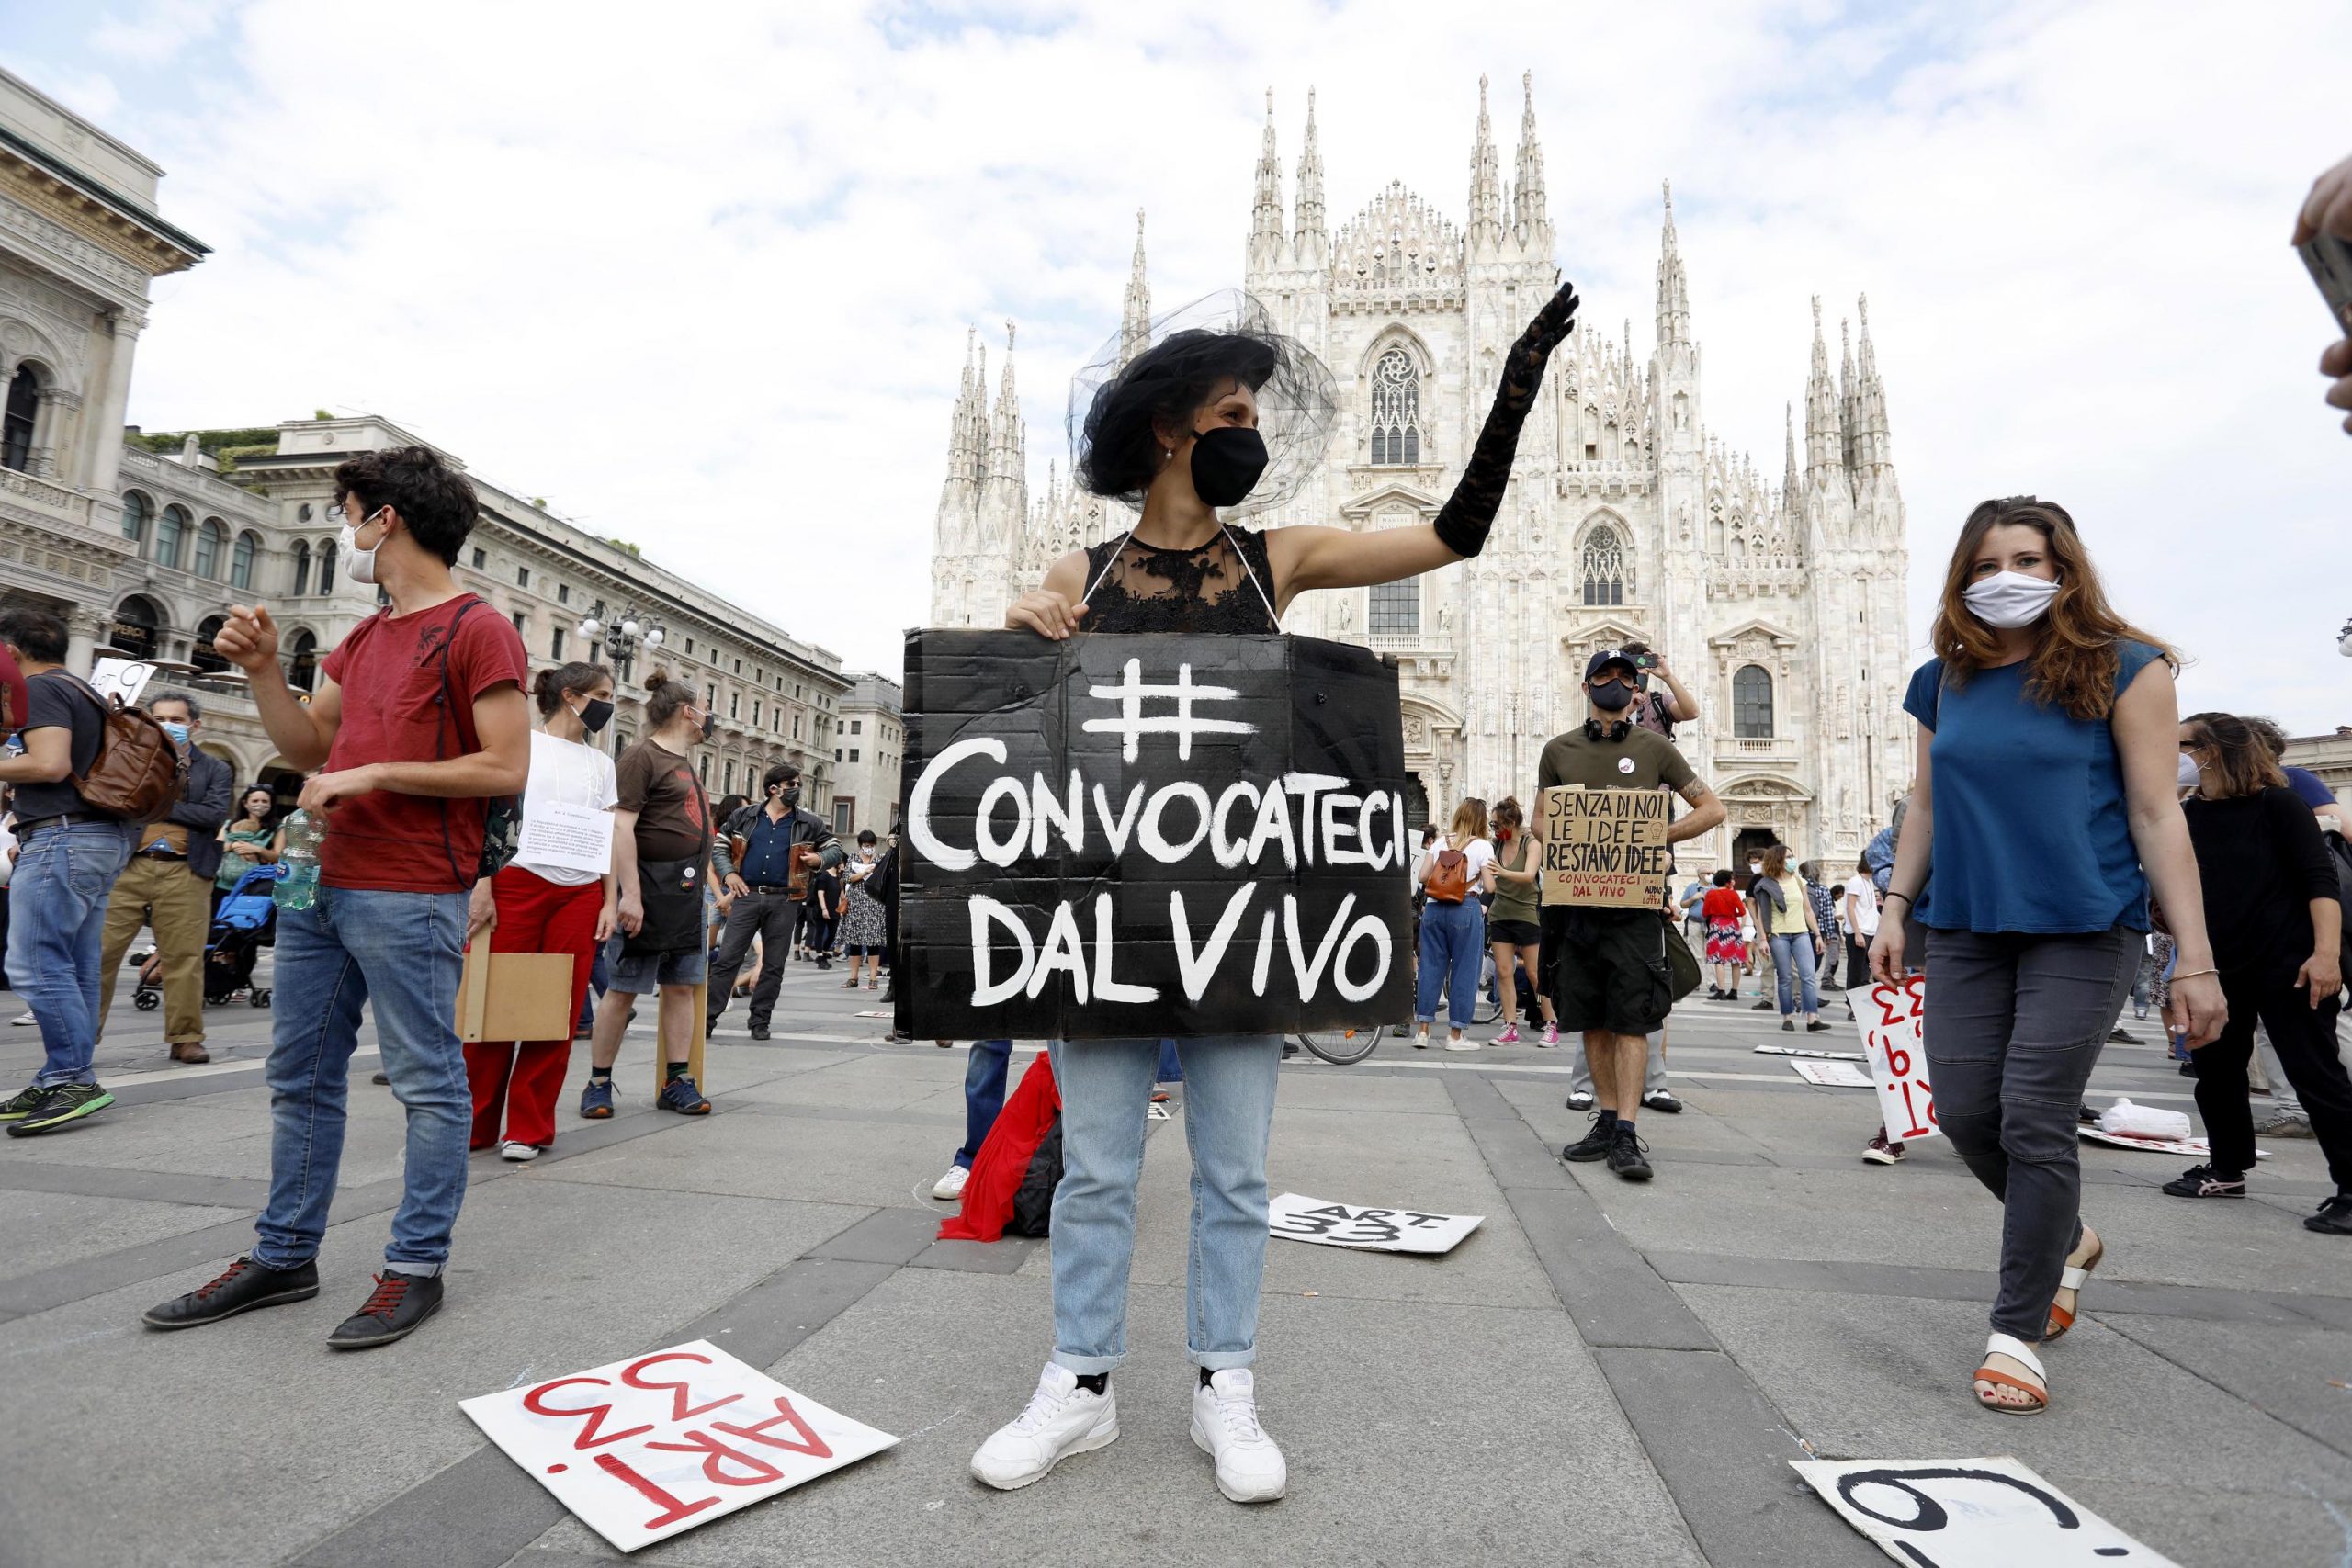 epa08454589 Workers from the arts, culture and entertainment industries take part in a flash mob and demonstration in Milan, Italy, 30 May 2020, during Phase 2 of the coronavirus disease (COVID-19) pandemic. According to media reports, the workers from the arts, culture and entertainment industries demonstated calling on the government for new rules allowing the resumption of live shows. Banner reads 'Summon us live'.  EPA/Mourad Balti Touati